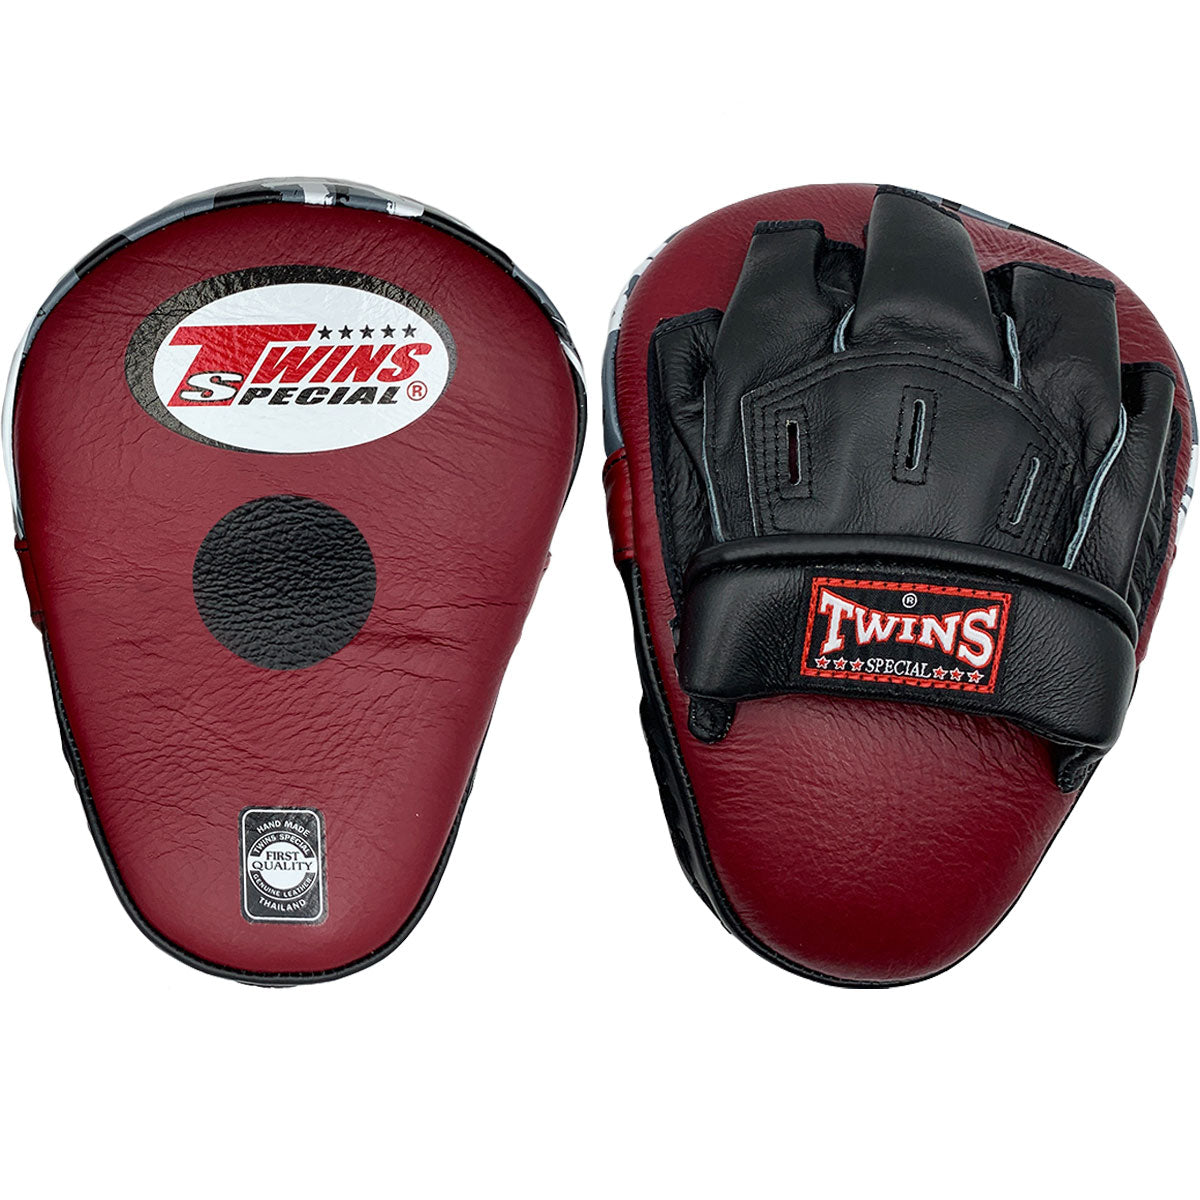 Focus Mitts Twins Special PML-10 Burgundy Black Curved